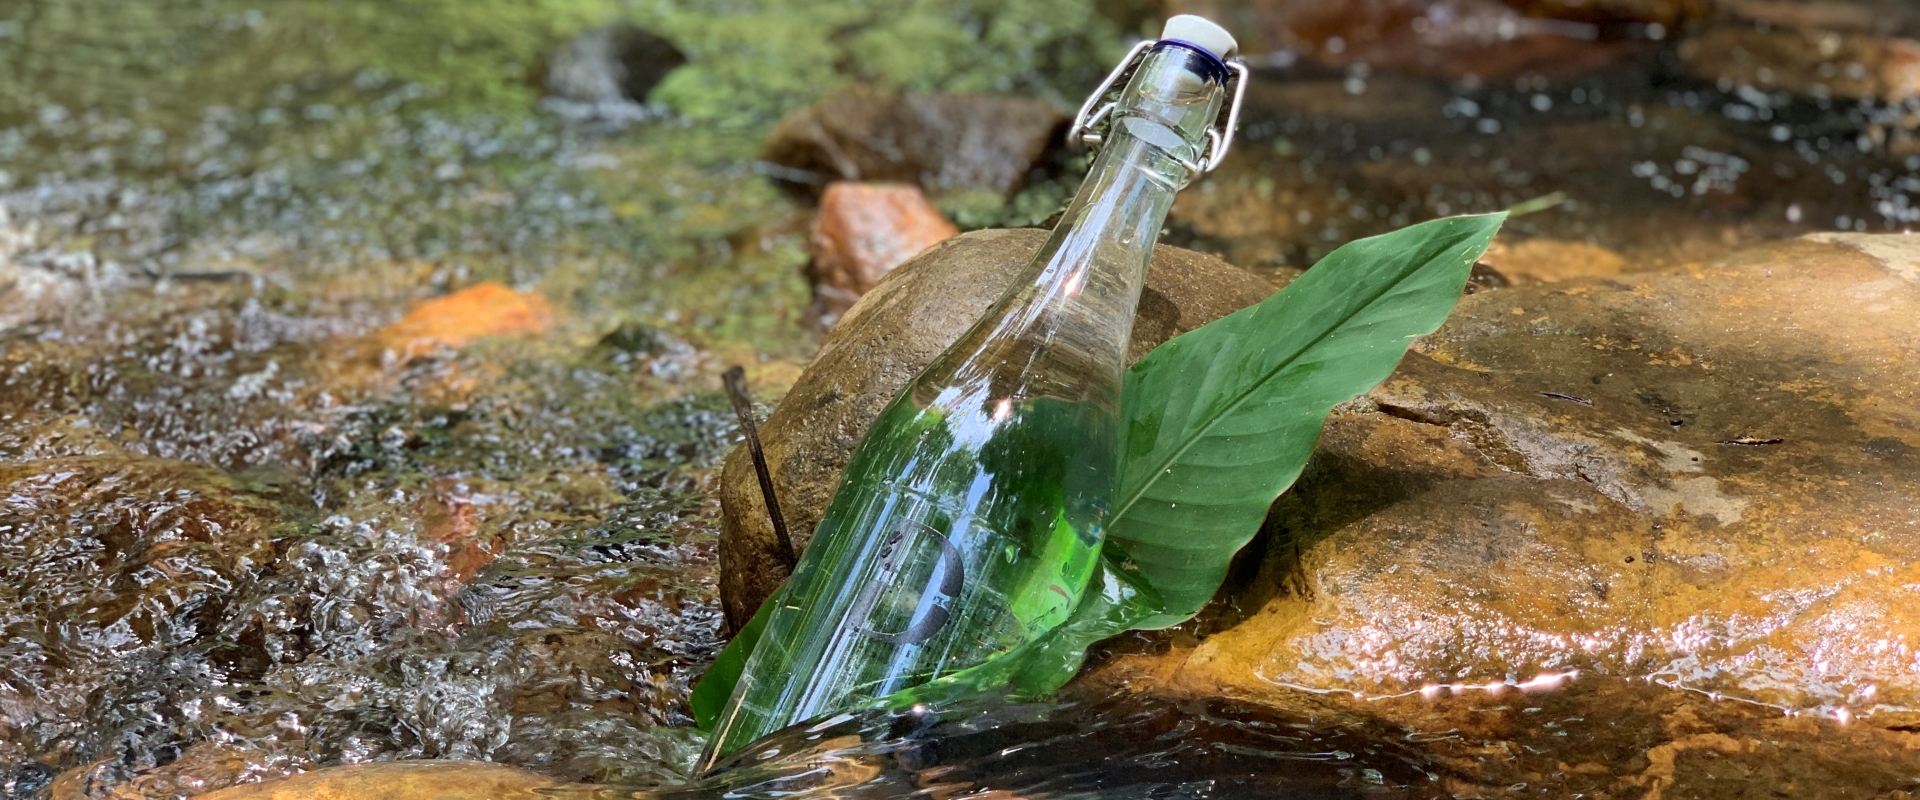 Glass water bottles were created to replace plastic bottled water